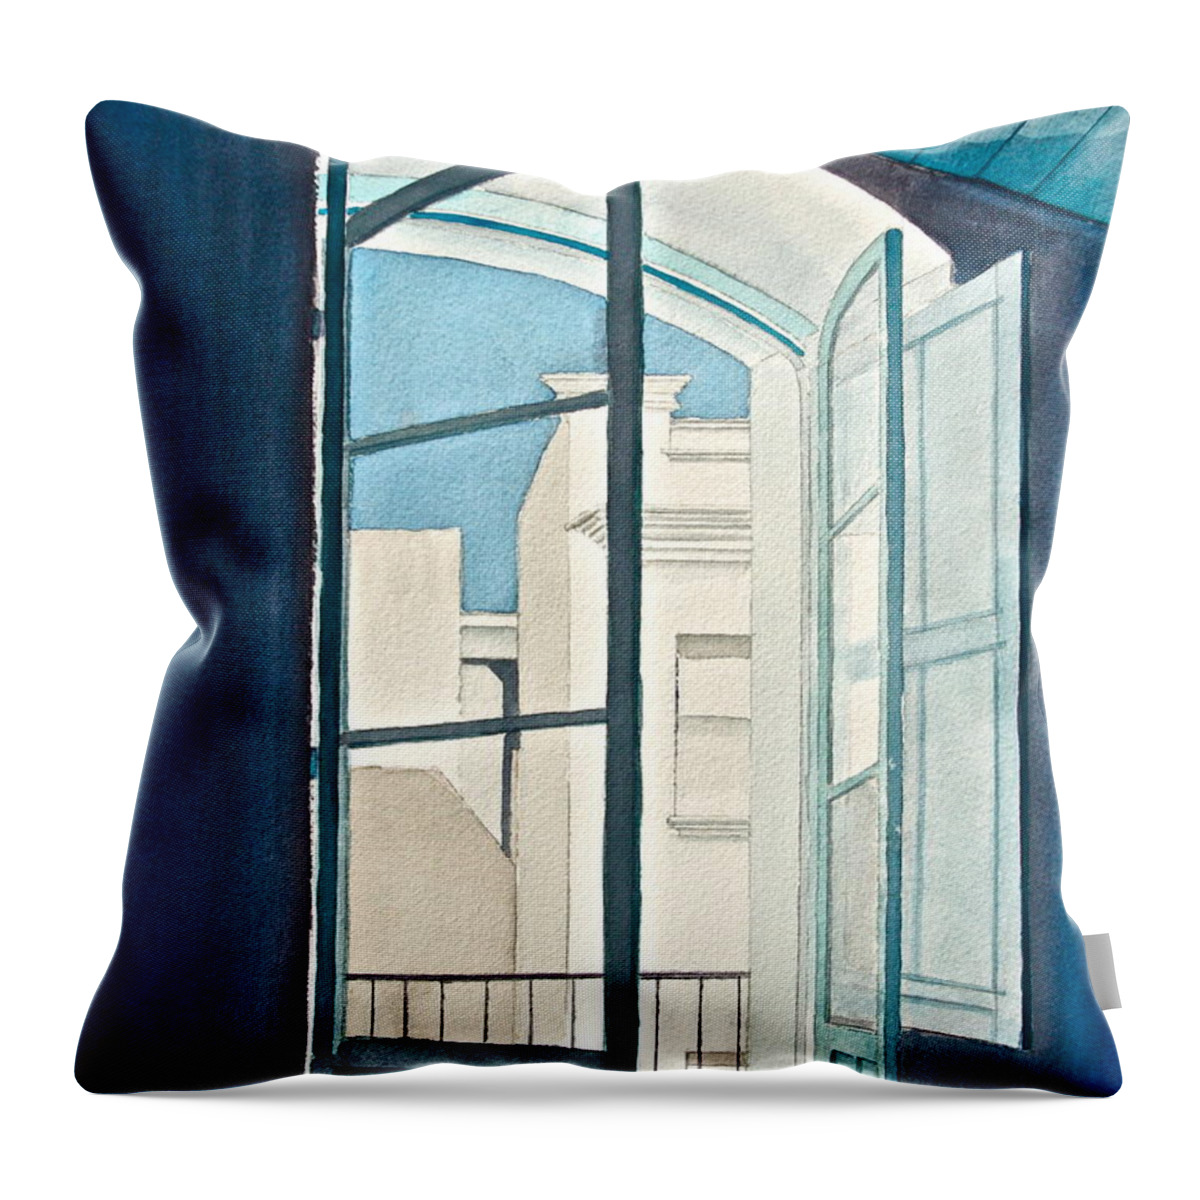 Blue Throw Pillow featuring the painting Blue Open by Frank SantAgata